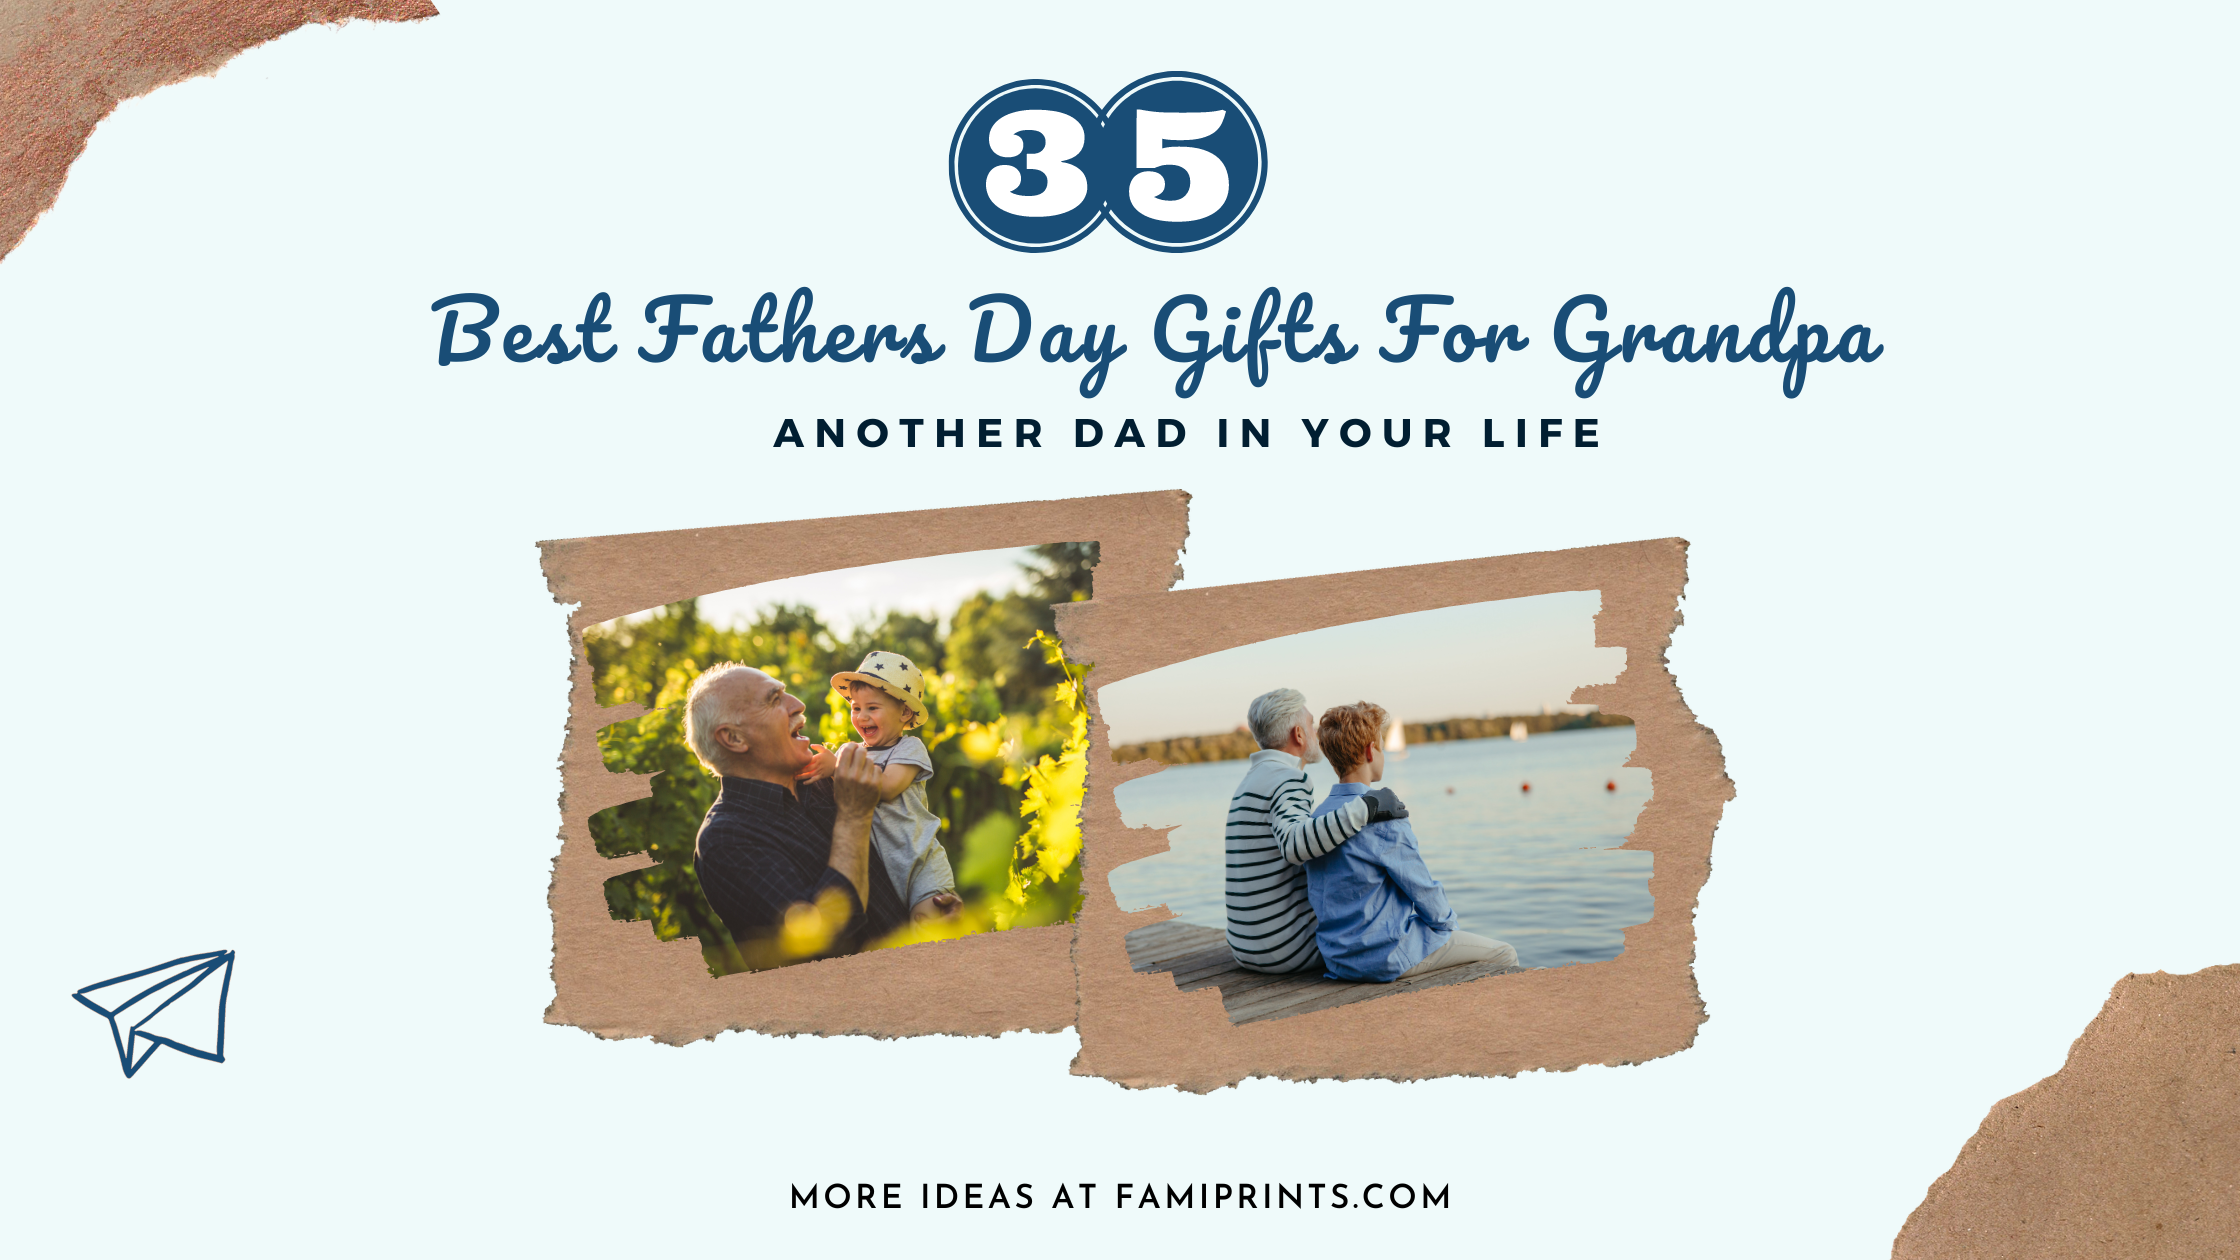 35+ Best Fathers Day Gifts For Grandpa - Another Dad In Your Life (2022 Guide) - FamiPrints | Trending Customizable Family Gifts